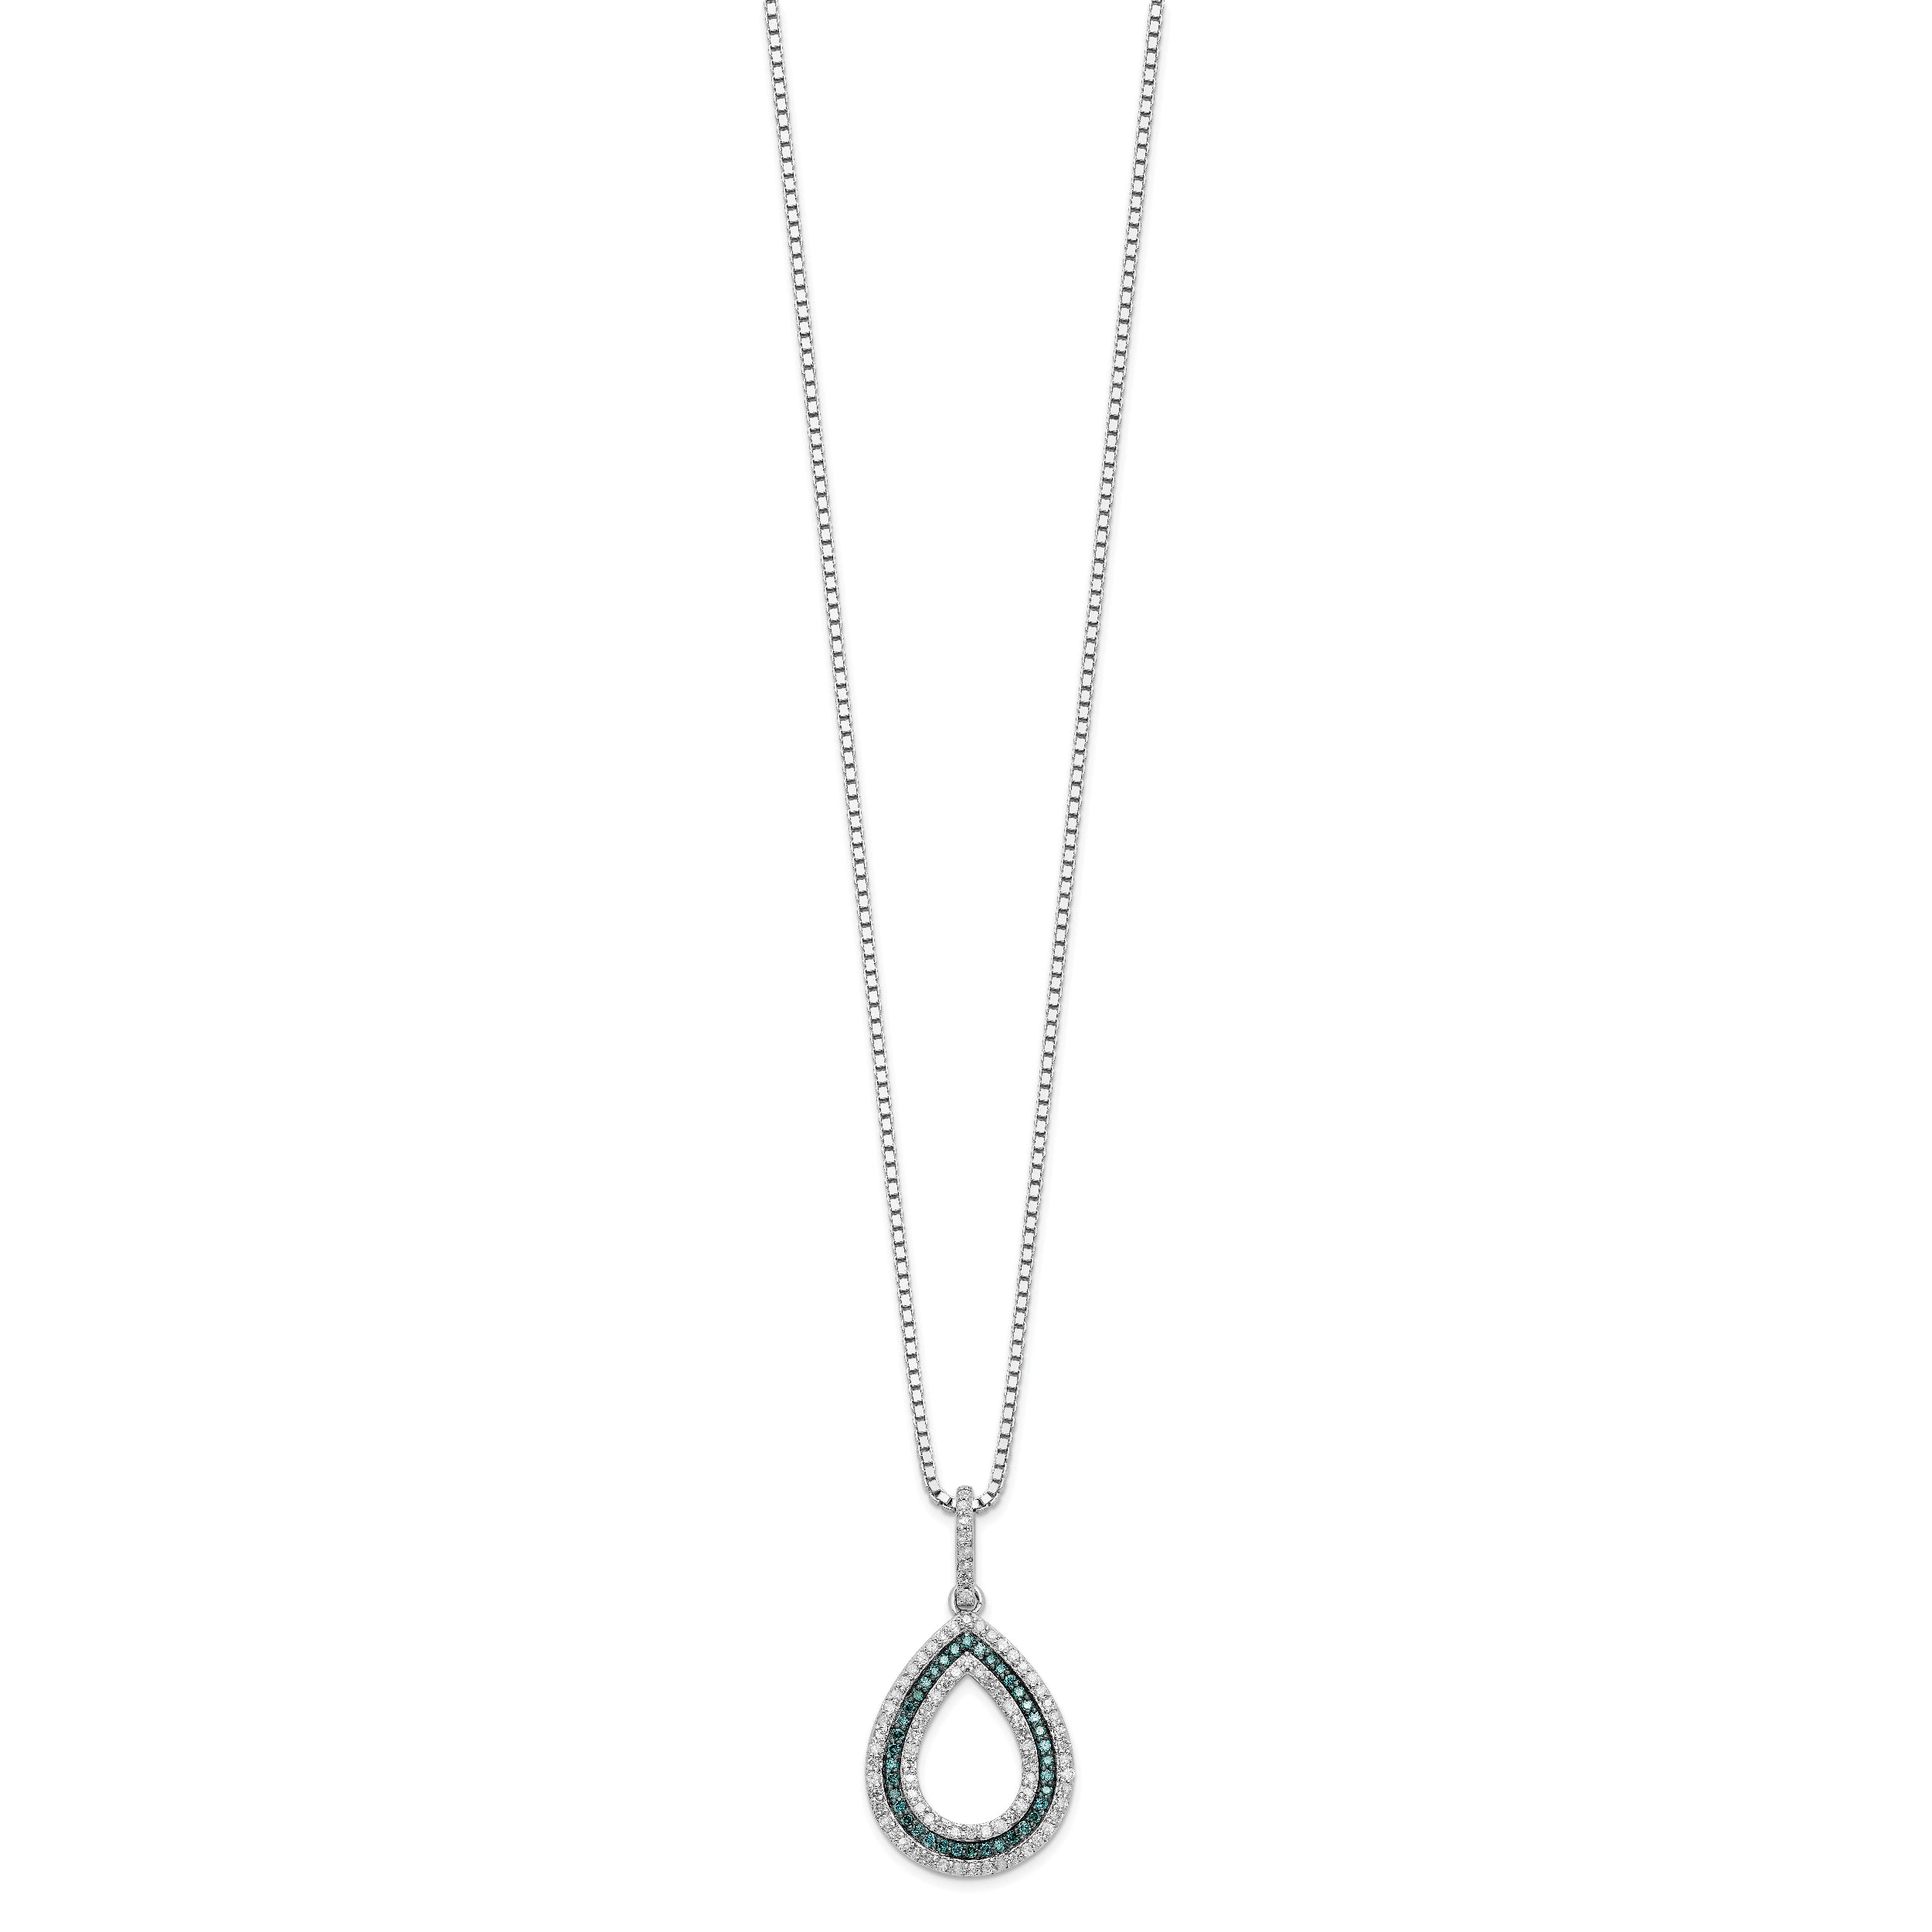 White Night Sterling Silver Rhodium-plated Blue and White Diamond Teardrop 18 Inch Necklace with 2 Inch Extender